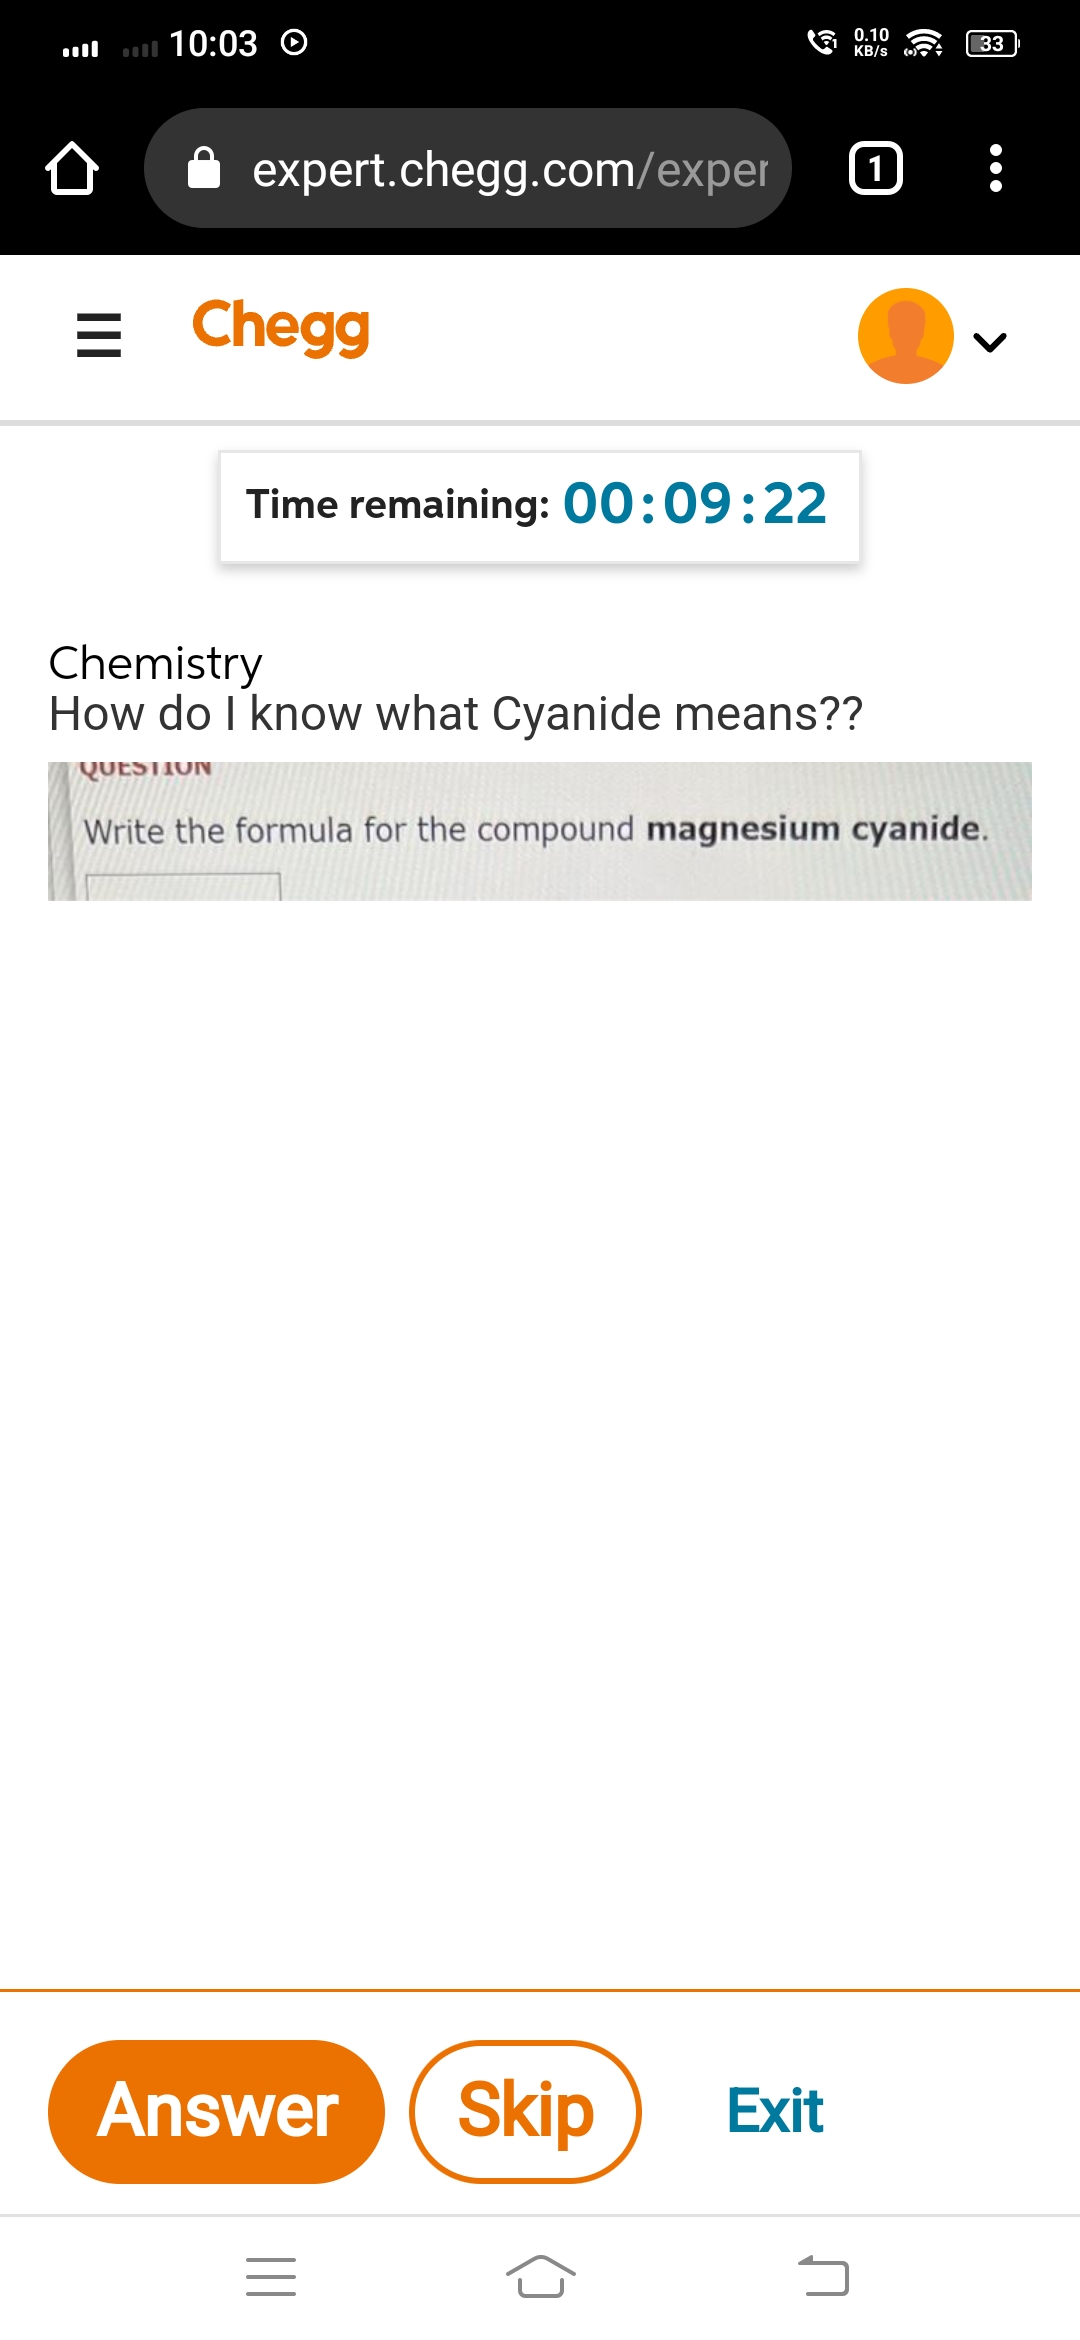 10:03 O
0.10
KB/s
1
כ
33
expert.chegg.com/exper
=
Chegg
Time remaining: 00:09:22
Chemistry
How do I know what Cyanide means??
QUESTION
Write the formula for the compound magnesium cyanide.
Answer Skip Exit
=